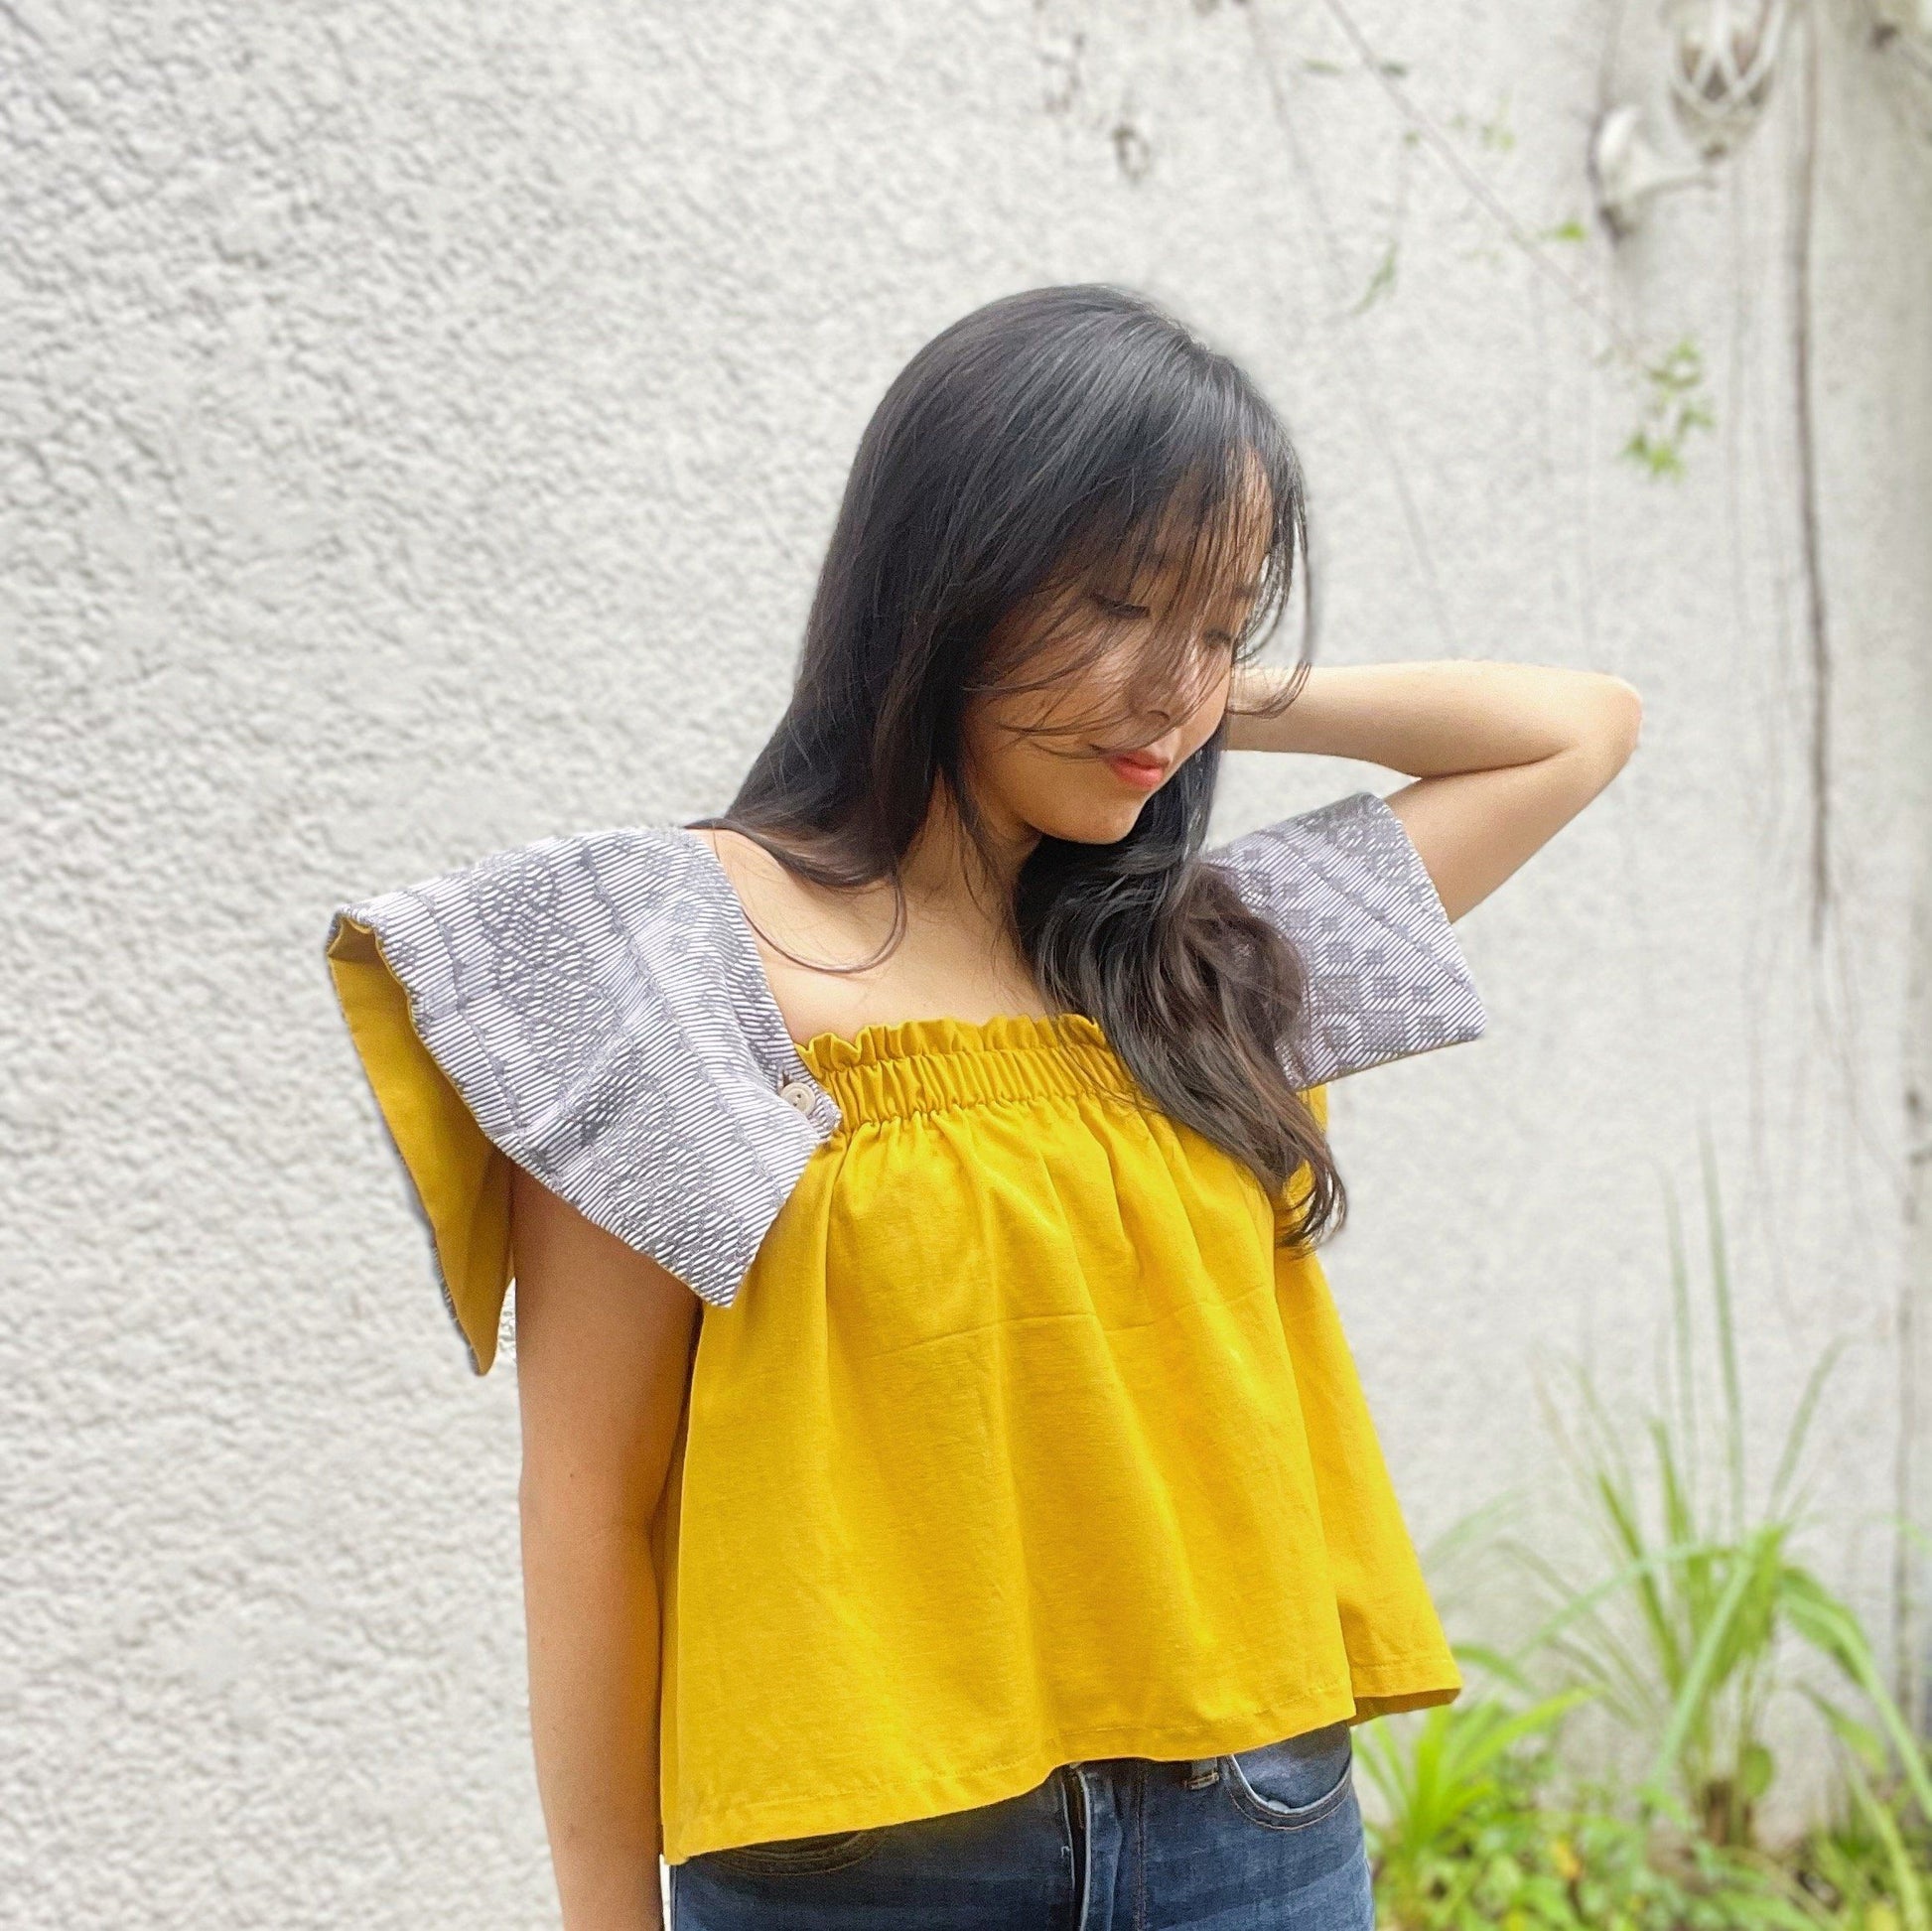 On-Off Shoulder Top Mustard in Pinilian Diamond Fashion Rags2Riches